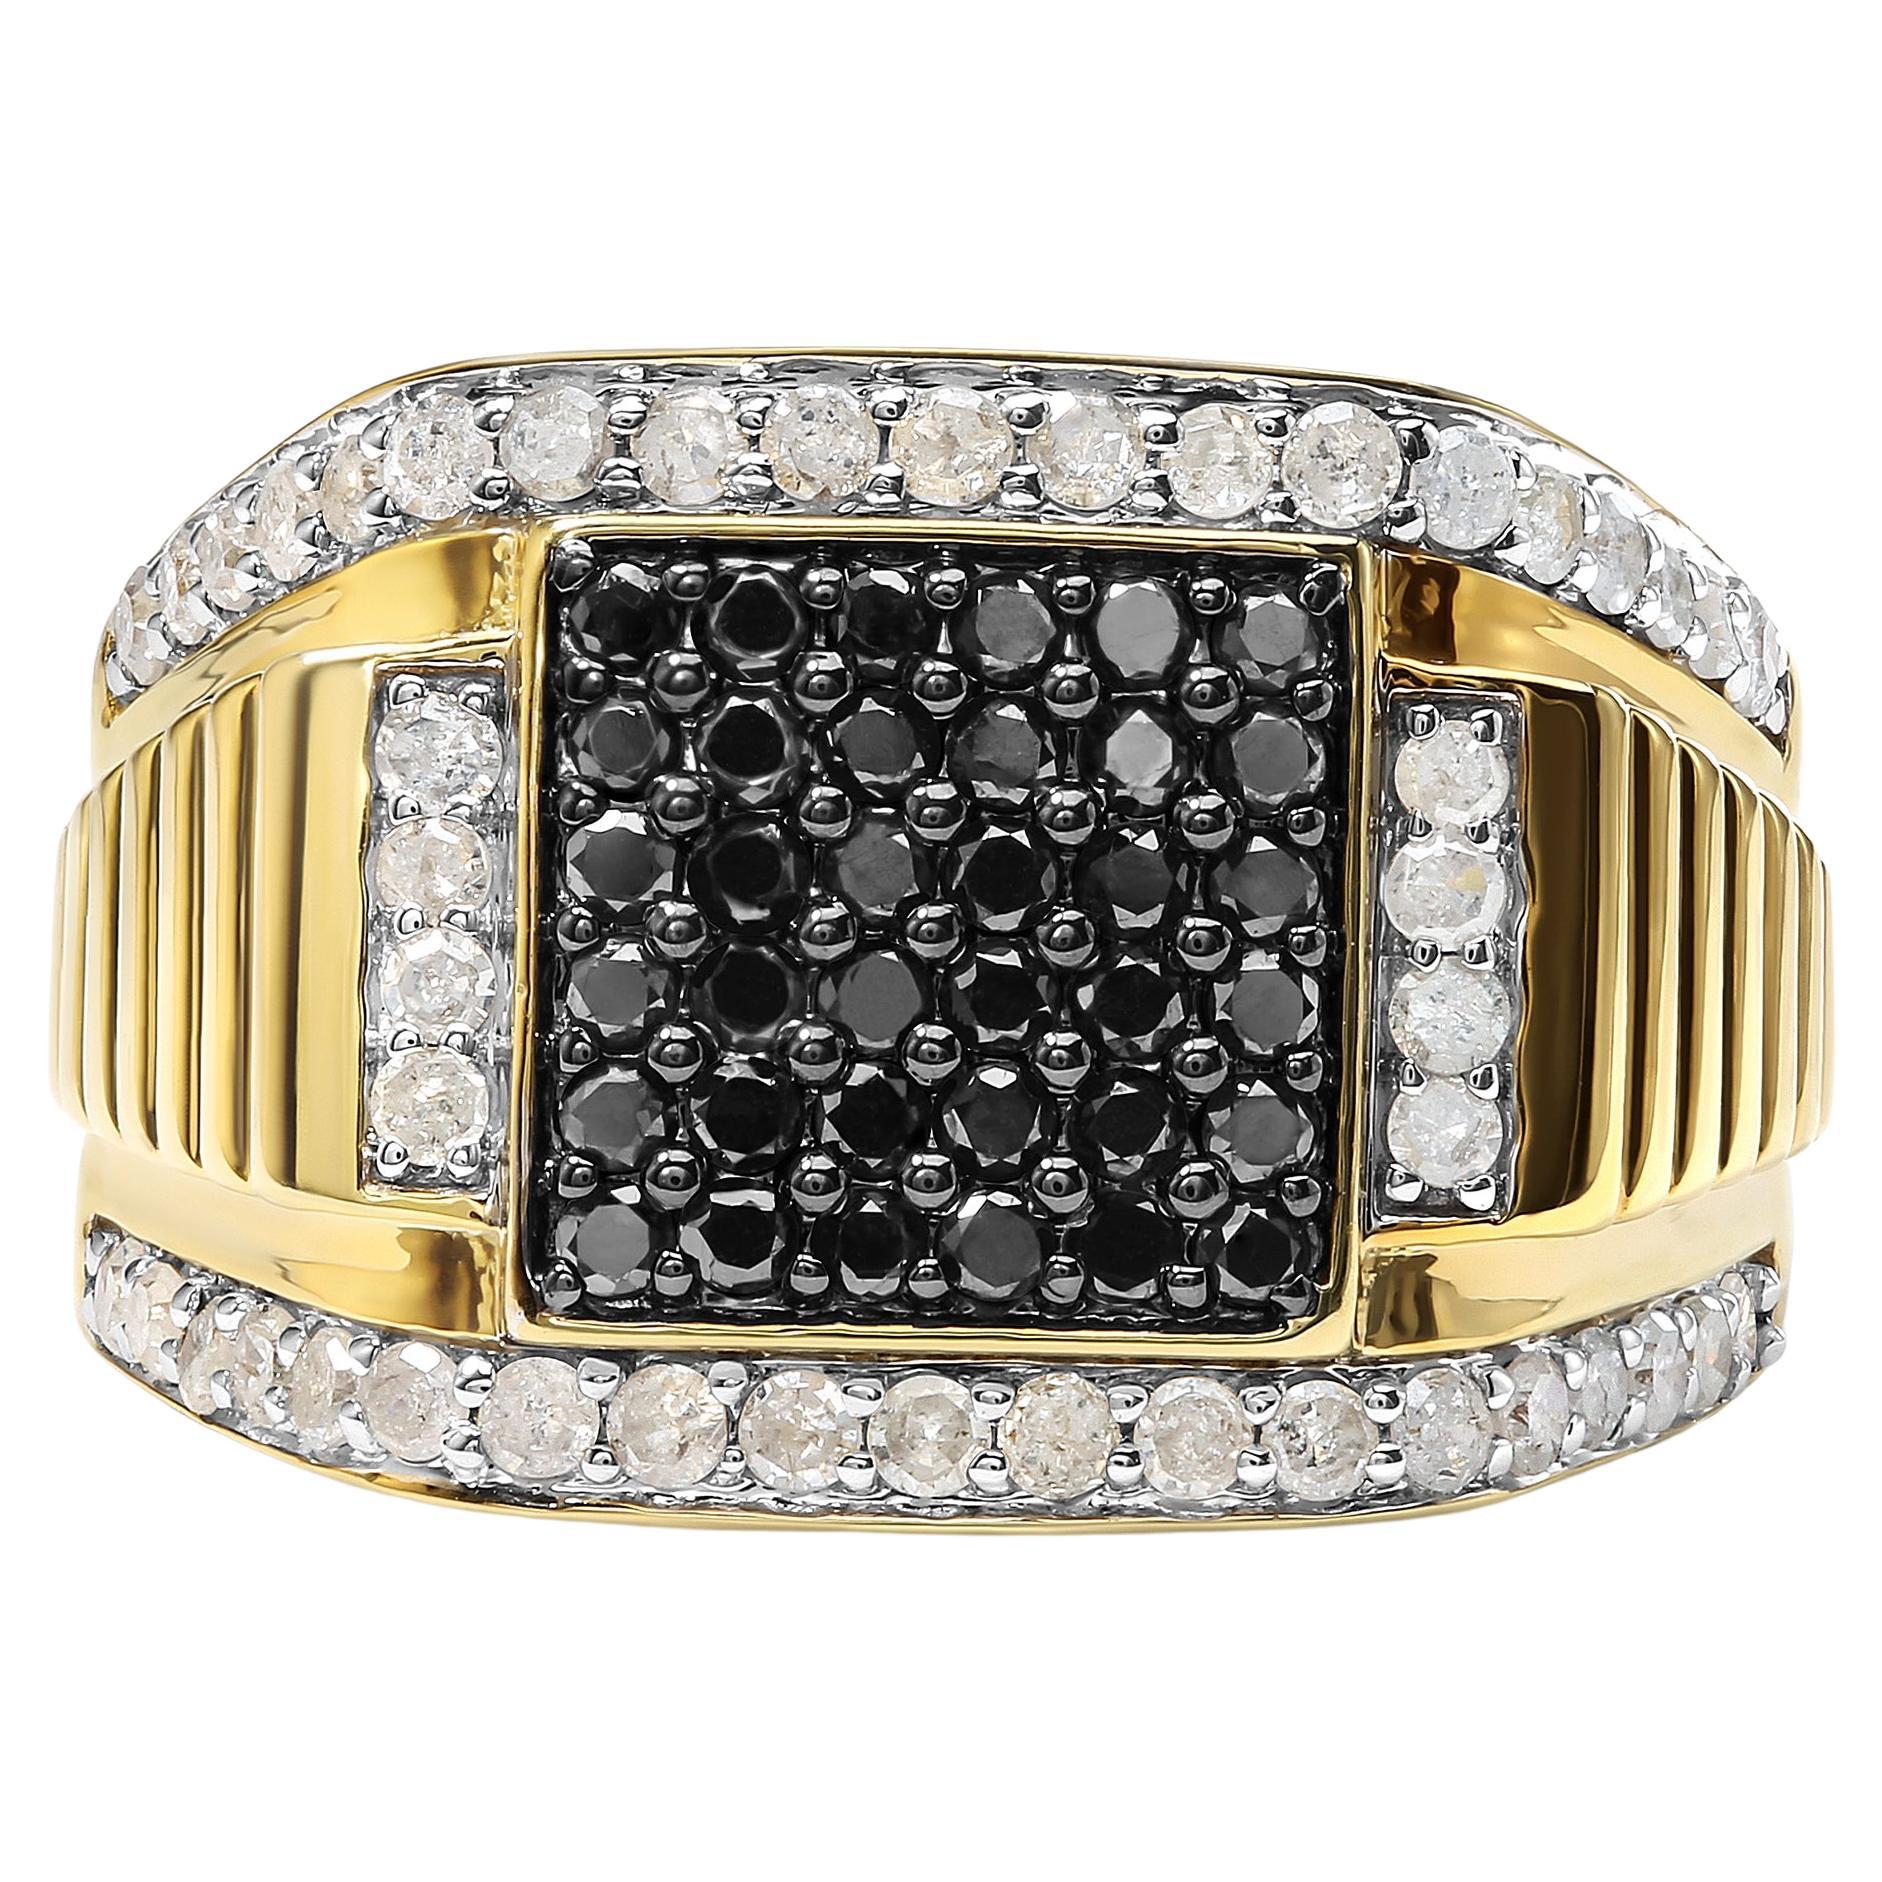 For Sale:  Men's 10K Yellow Gold 1 1/2 Carat White and Black Treated Diamond Cluster Ring